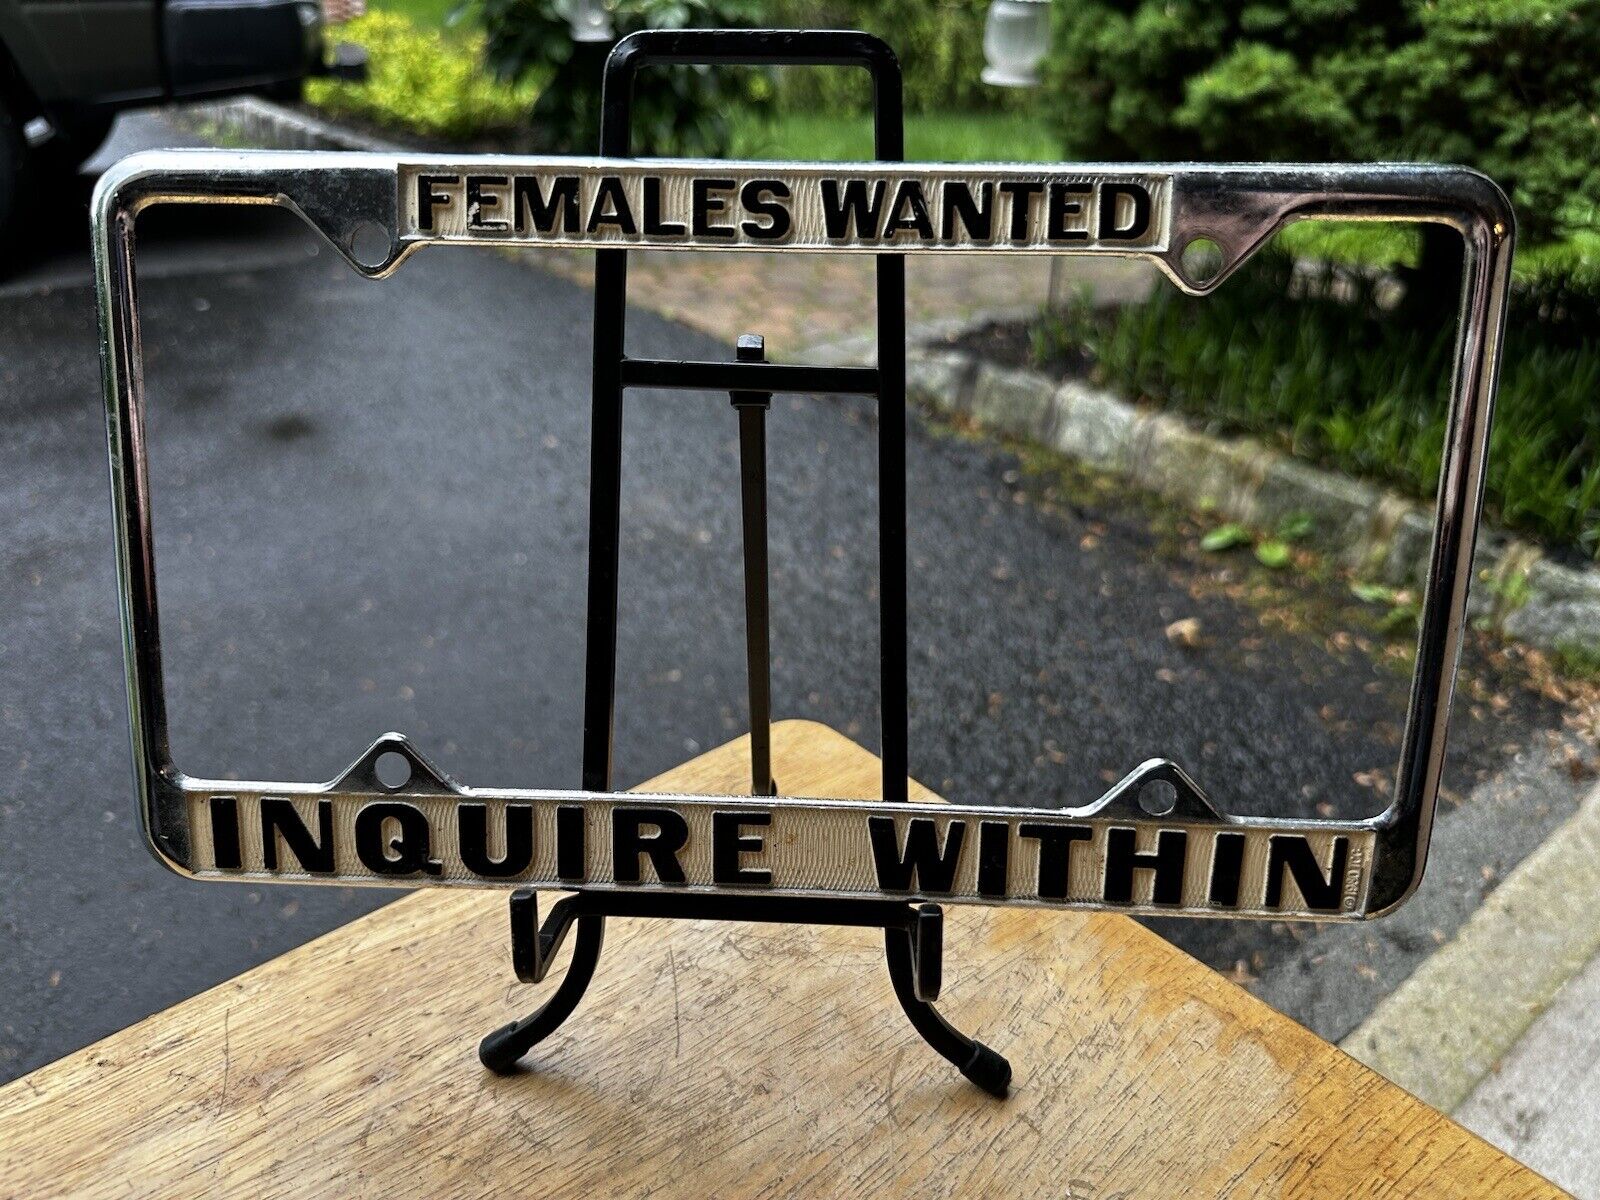 FEMALES WANTED INQUIRE WITHIN VINTAGE, Stamped 1980 METAL LICENSE PLATE FRAME